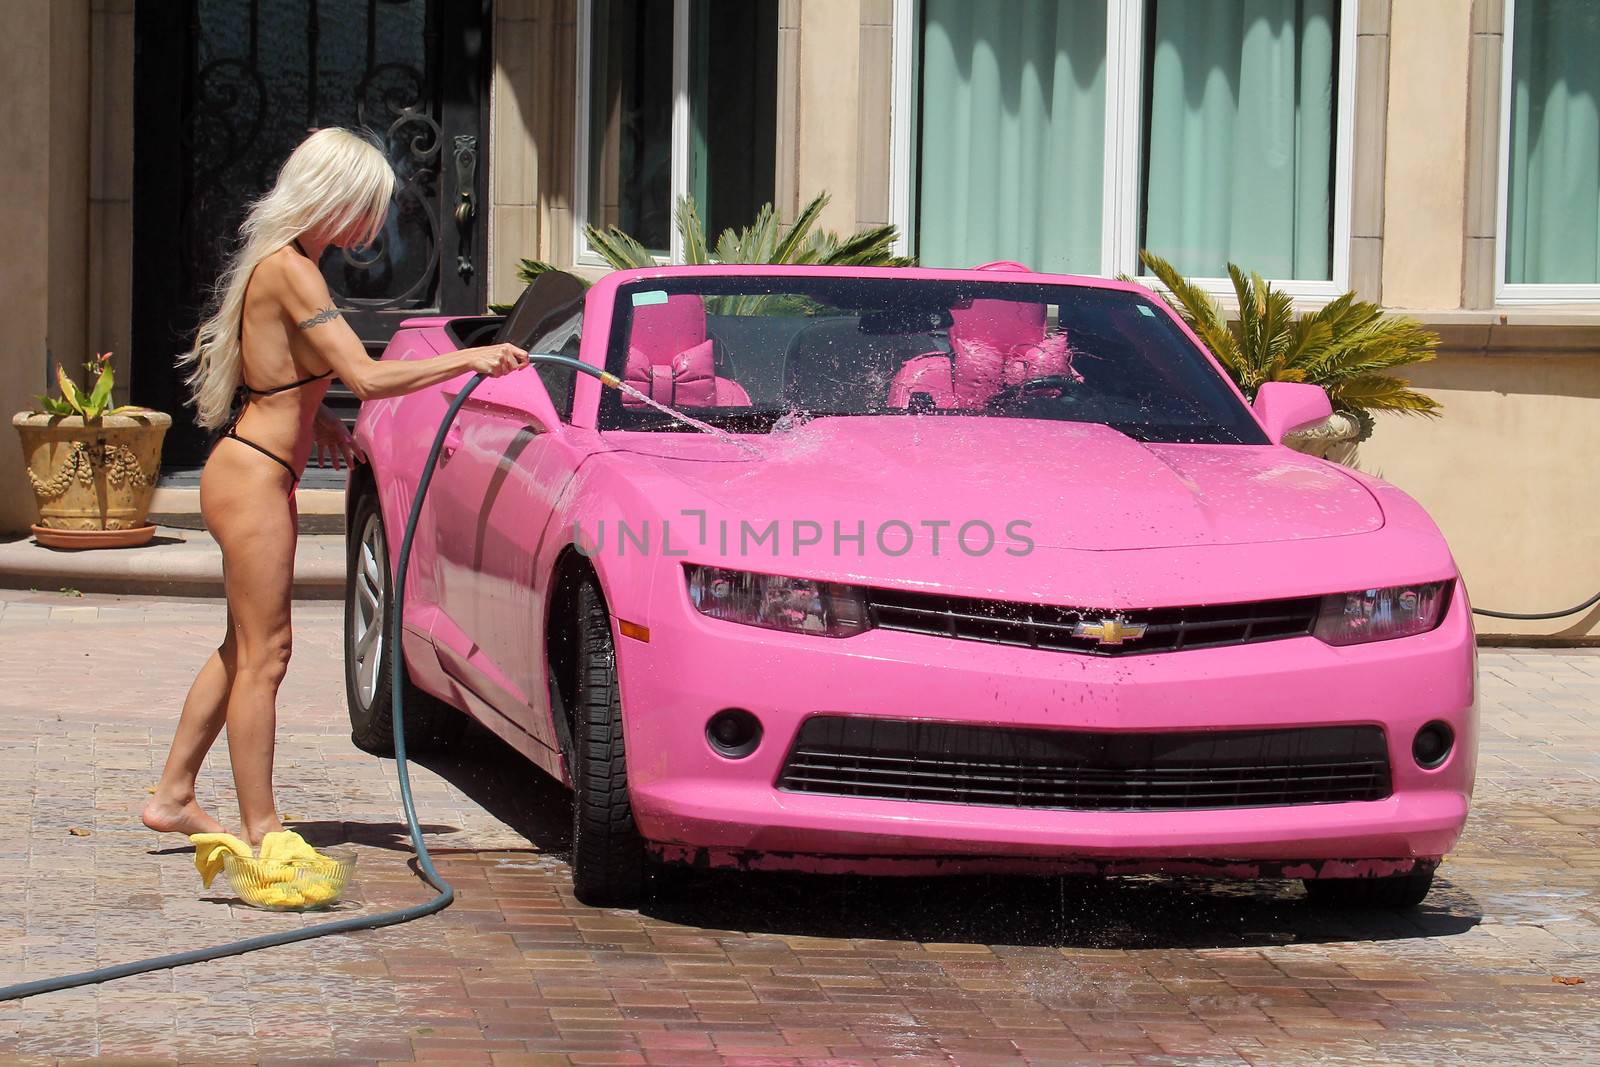 Frenchy Morgan the "Celebrity Big Brother" Star is spotted on a hot day wearing a tiny pink bikini while washing her pink car in Malibu, CA 05-22-17/ImageCollect by ImageCollect